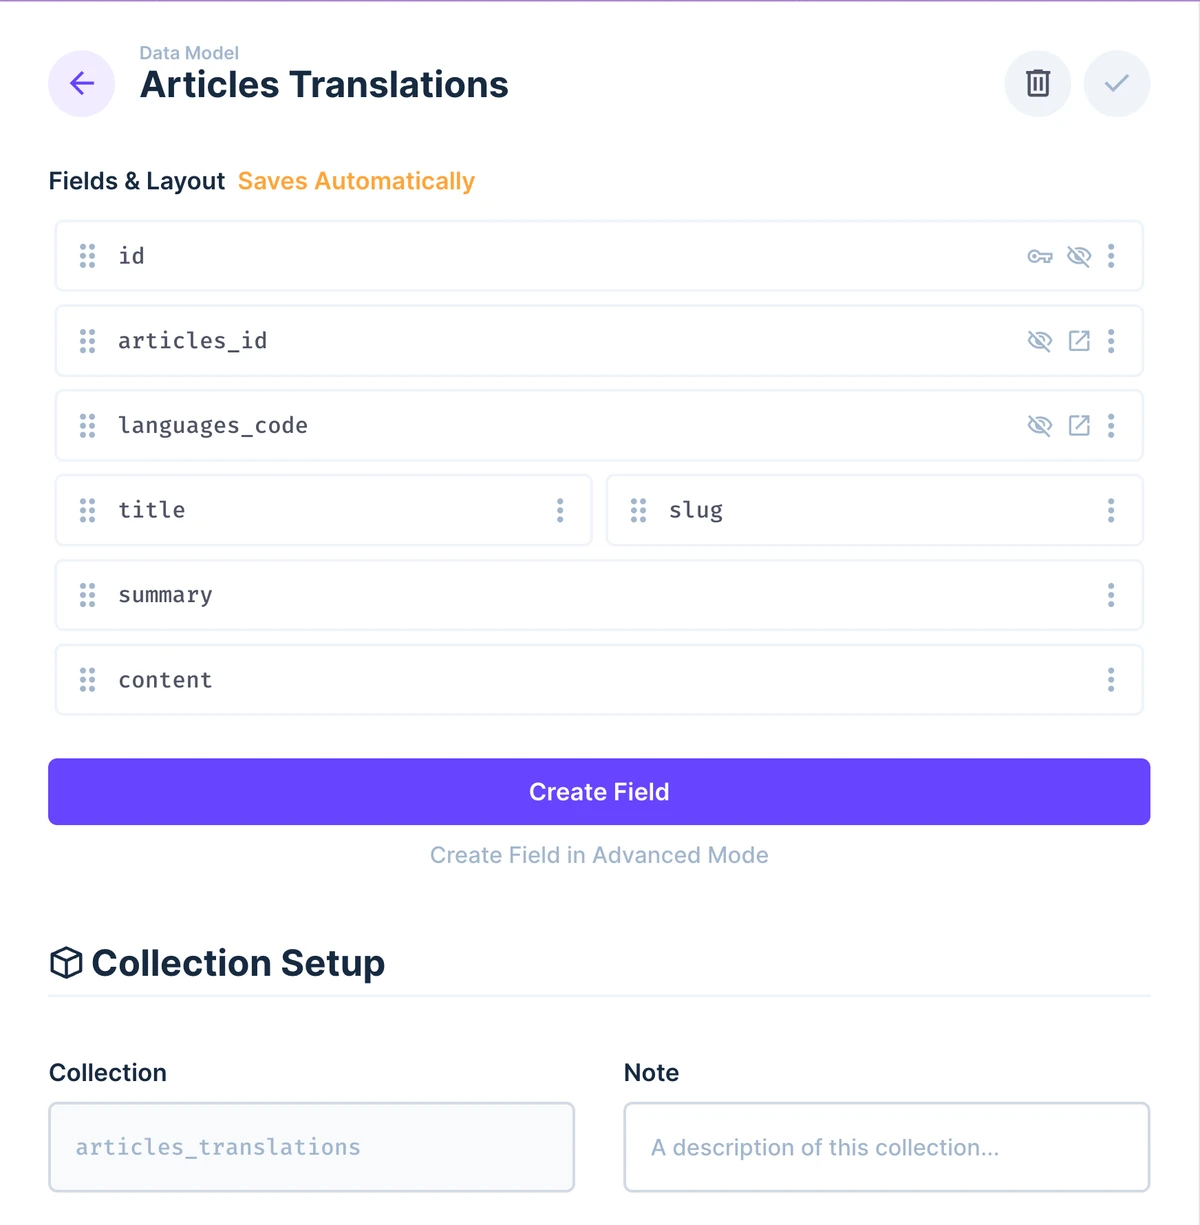 Data Model settings screen for the Articles Translations collection is displayed. The following fields are shown: id, articles_id, languages_code, title, slug, summary, content.